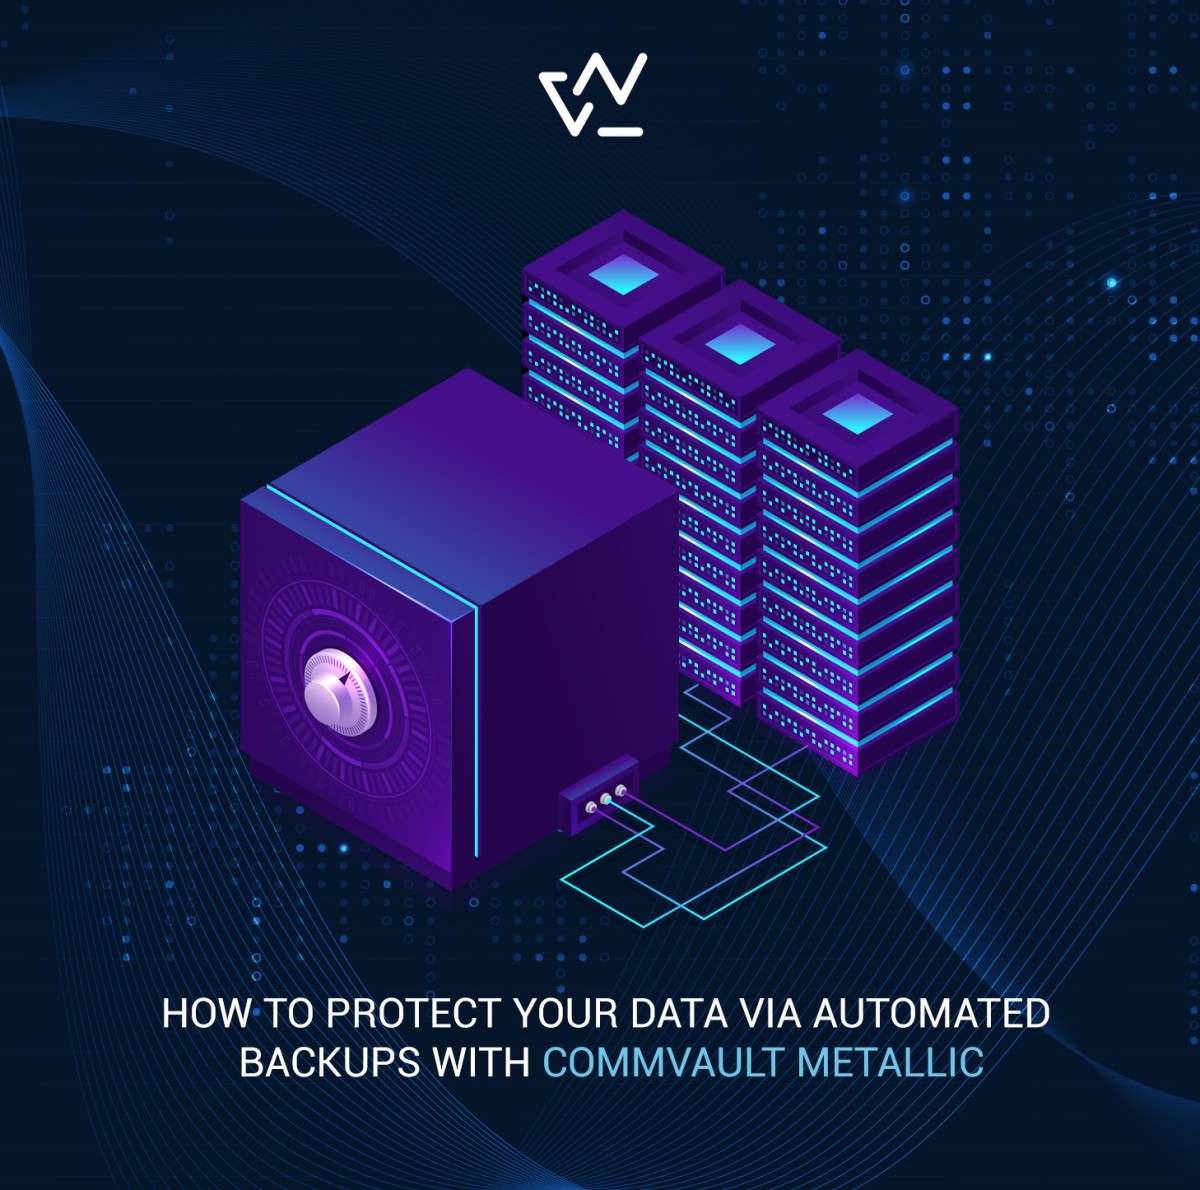 HOW TO PROTECT YOUR DATA VIA AUTOMATED BACKUPS WITH COMMVAULT METALLIC